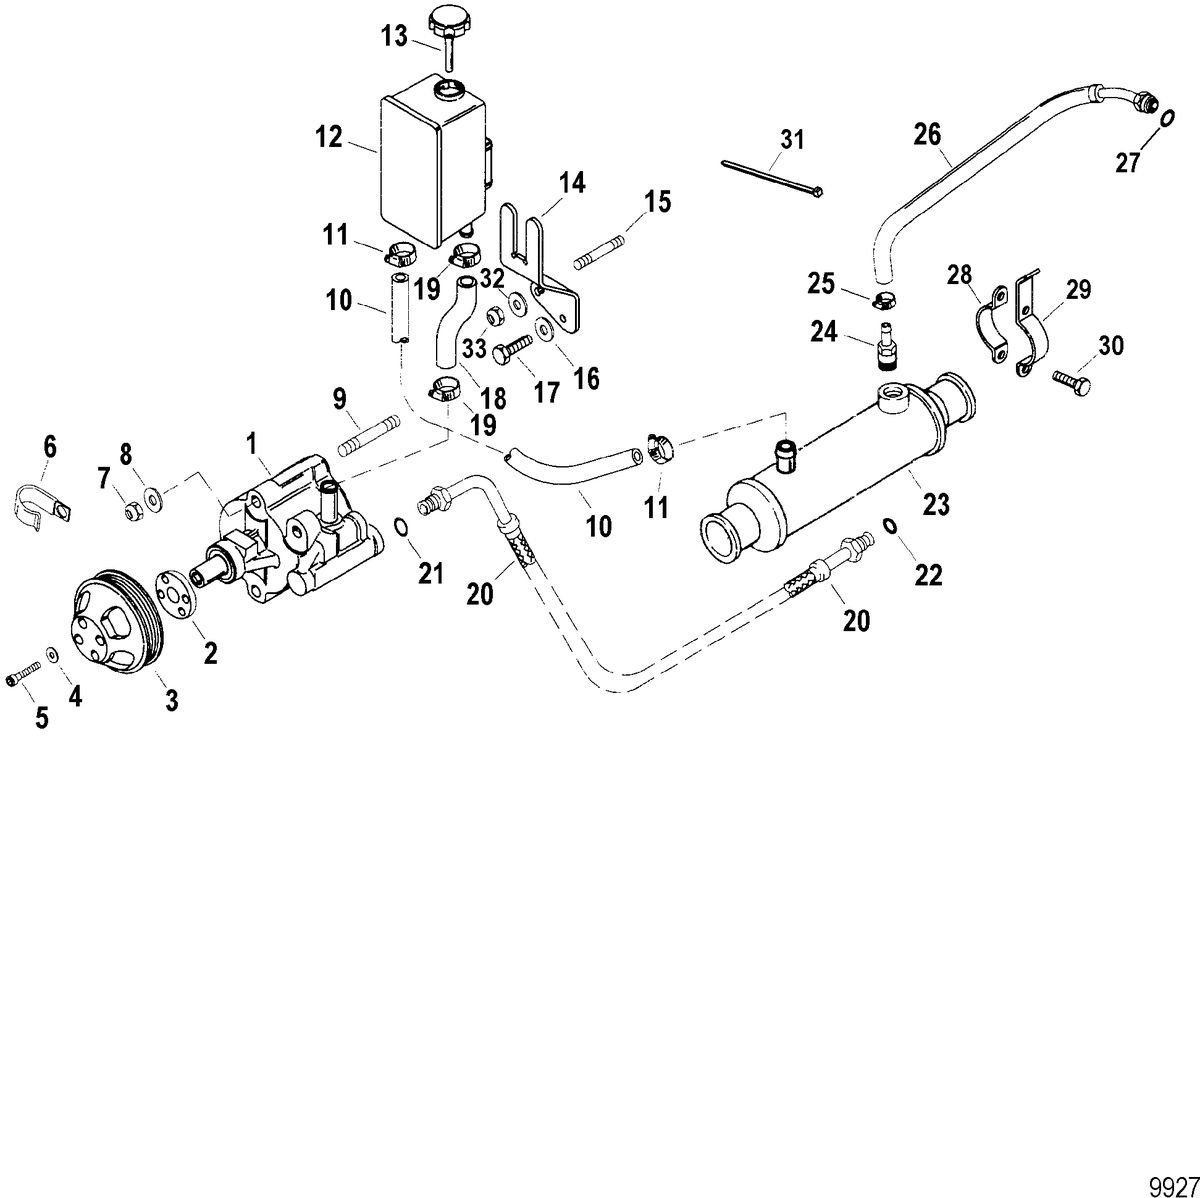 RACE STERNDRIVE 575 SCI Power-Assisted Steering Components(Design I)